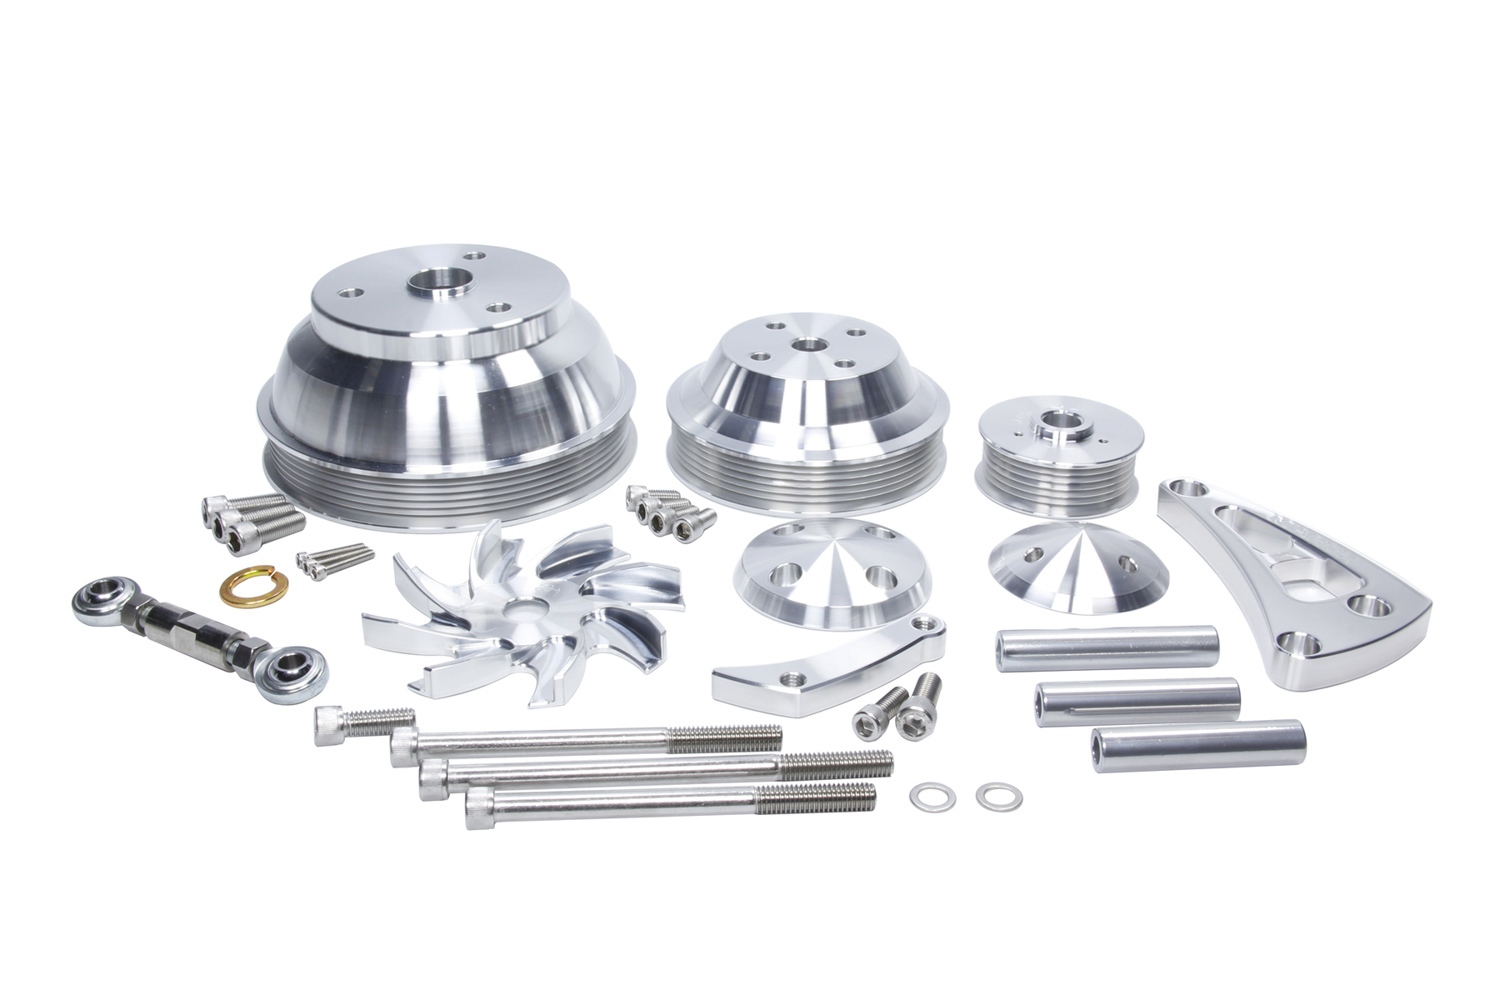 March Performance 22043 Pulley Kit, Ultra, High Water Flow, 6-Rib Serpentine, Aluminum, Clear Power Coat, Mid-Mount, Long Water Pump, Small Block Chevy, Kit